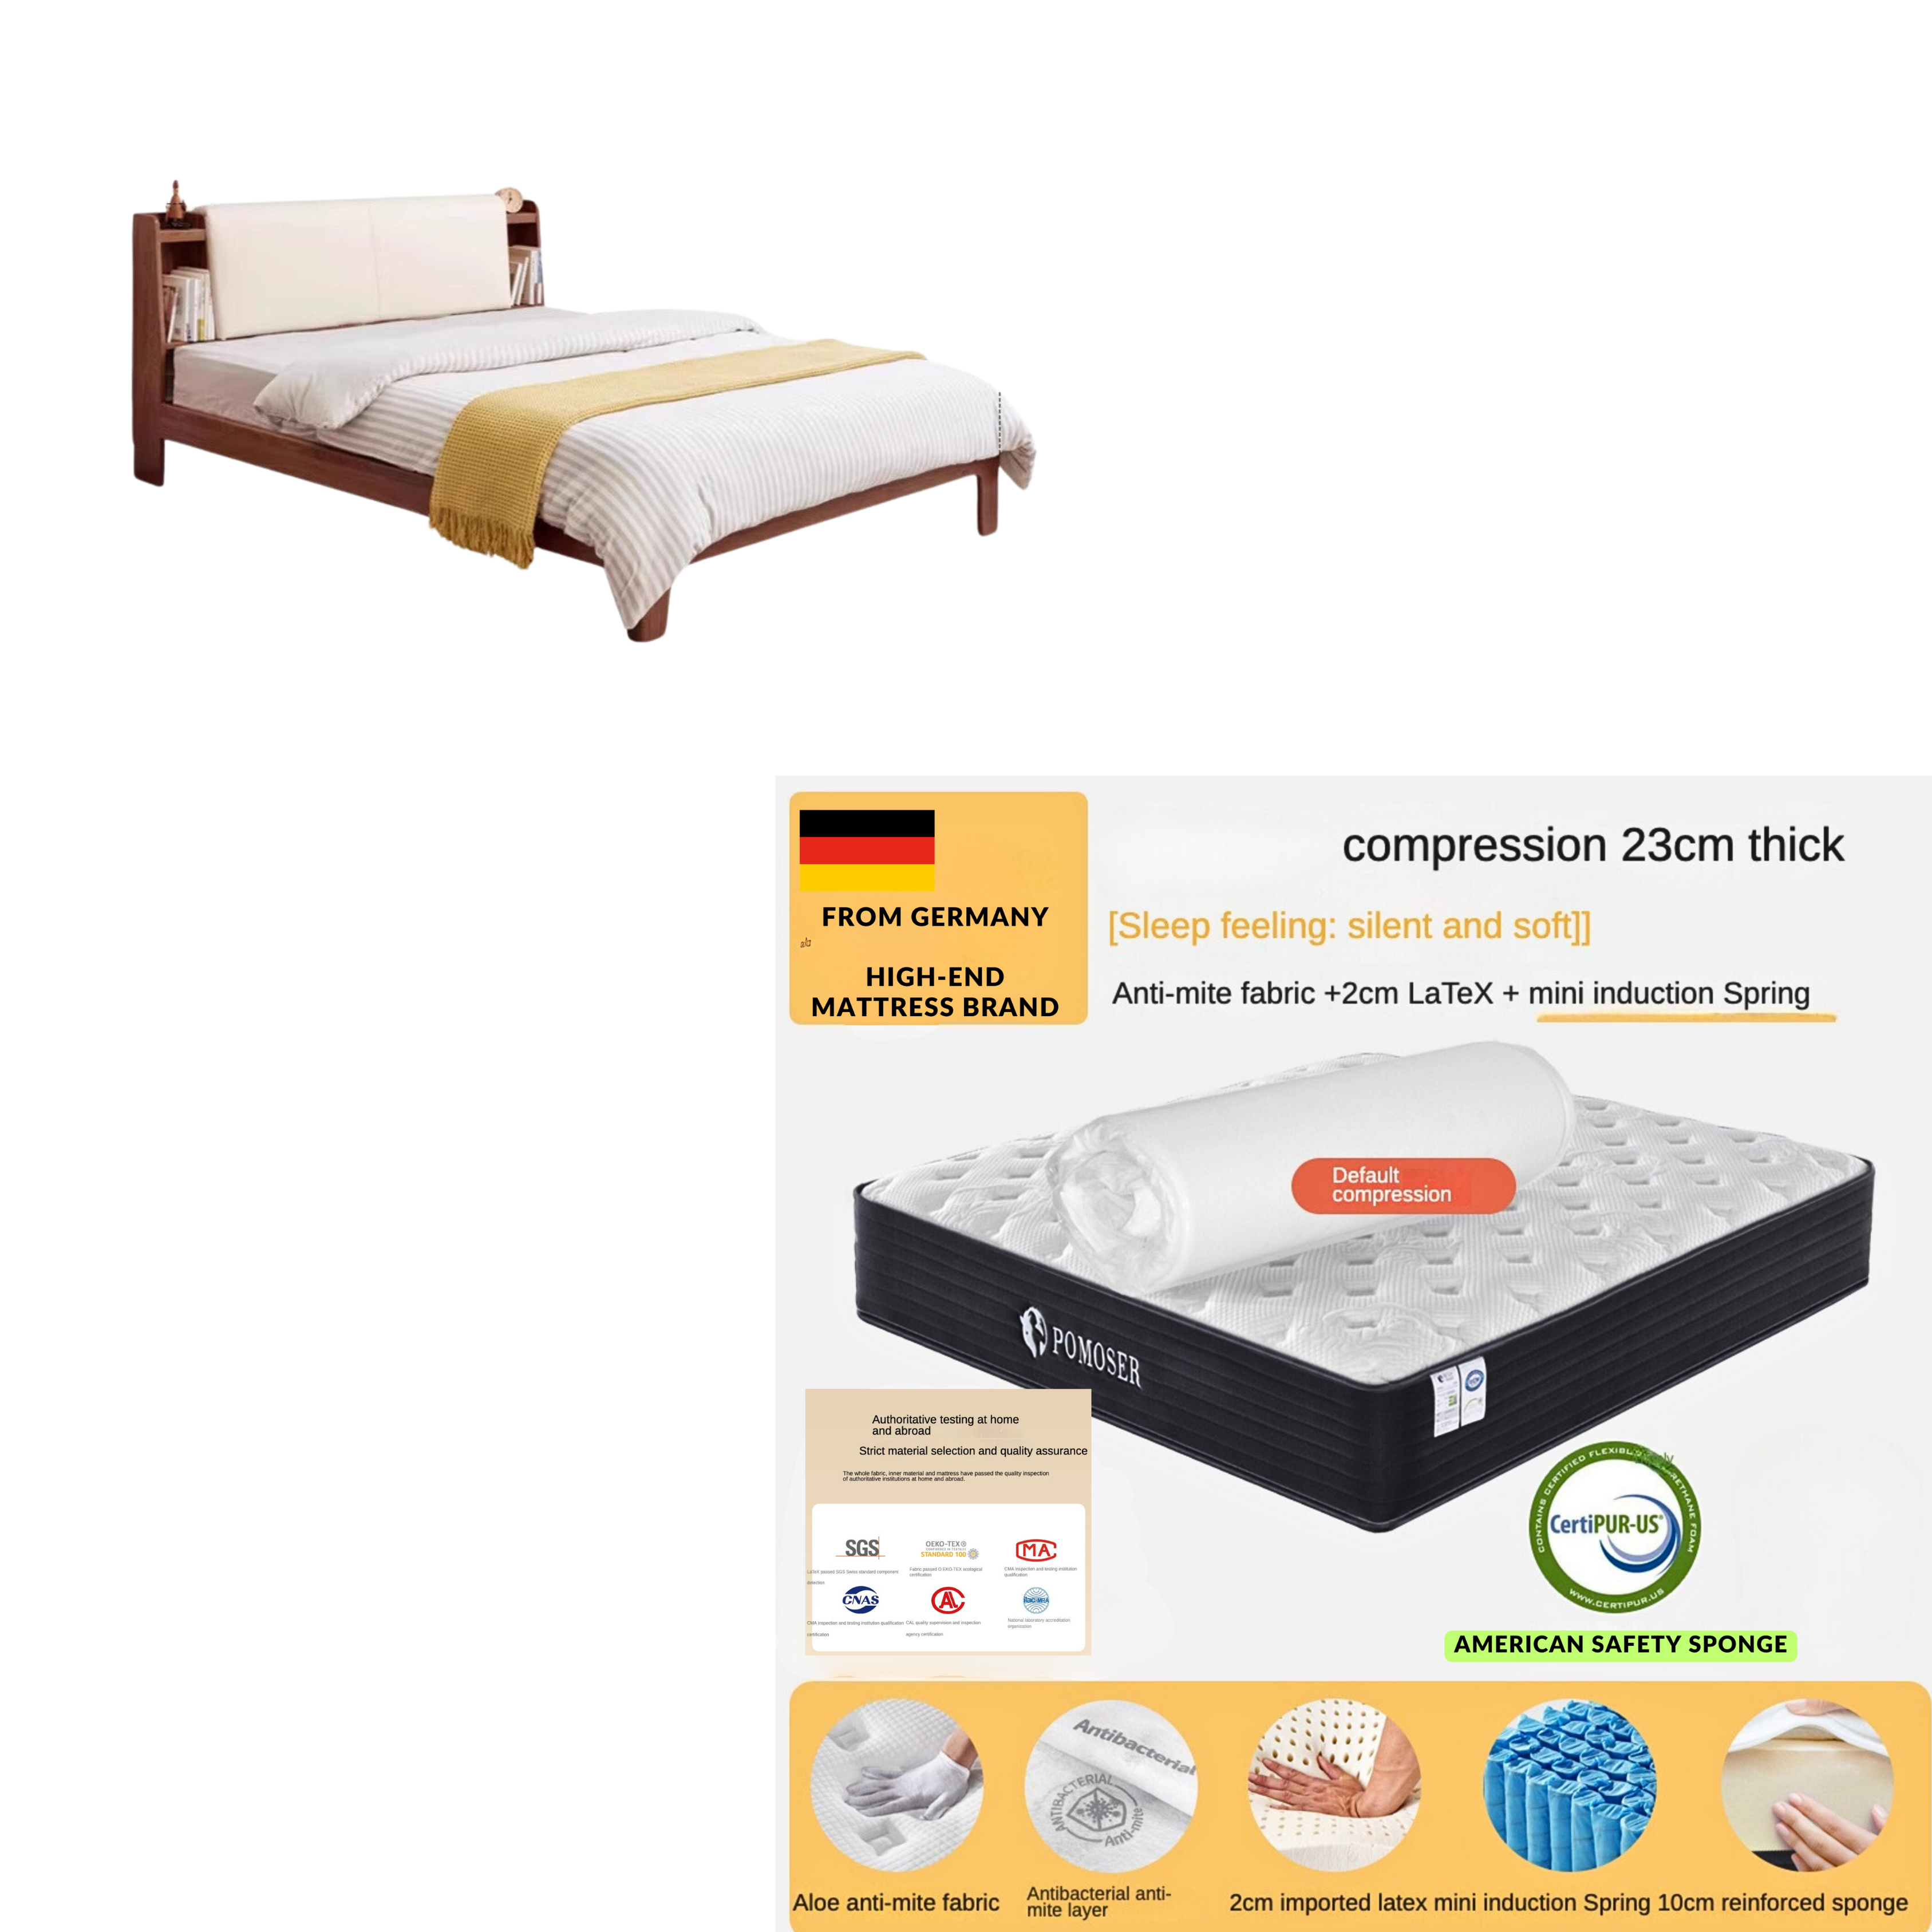 Oak Solid wood luminous bed with shelf genuine leather, technical fabric"